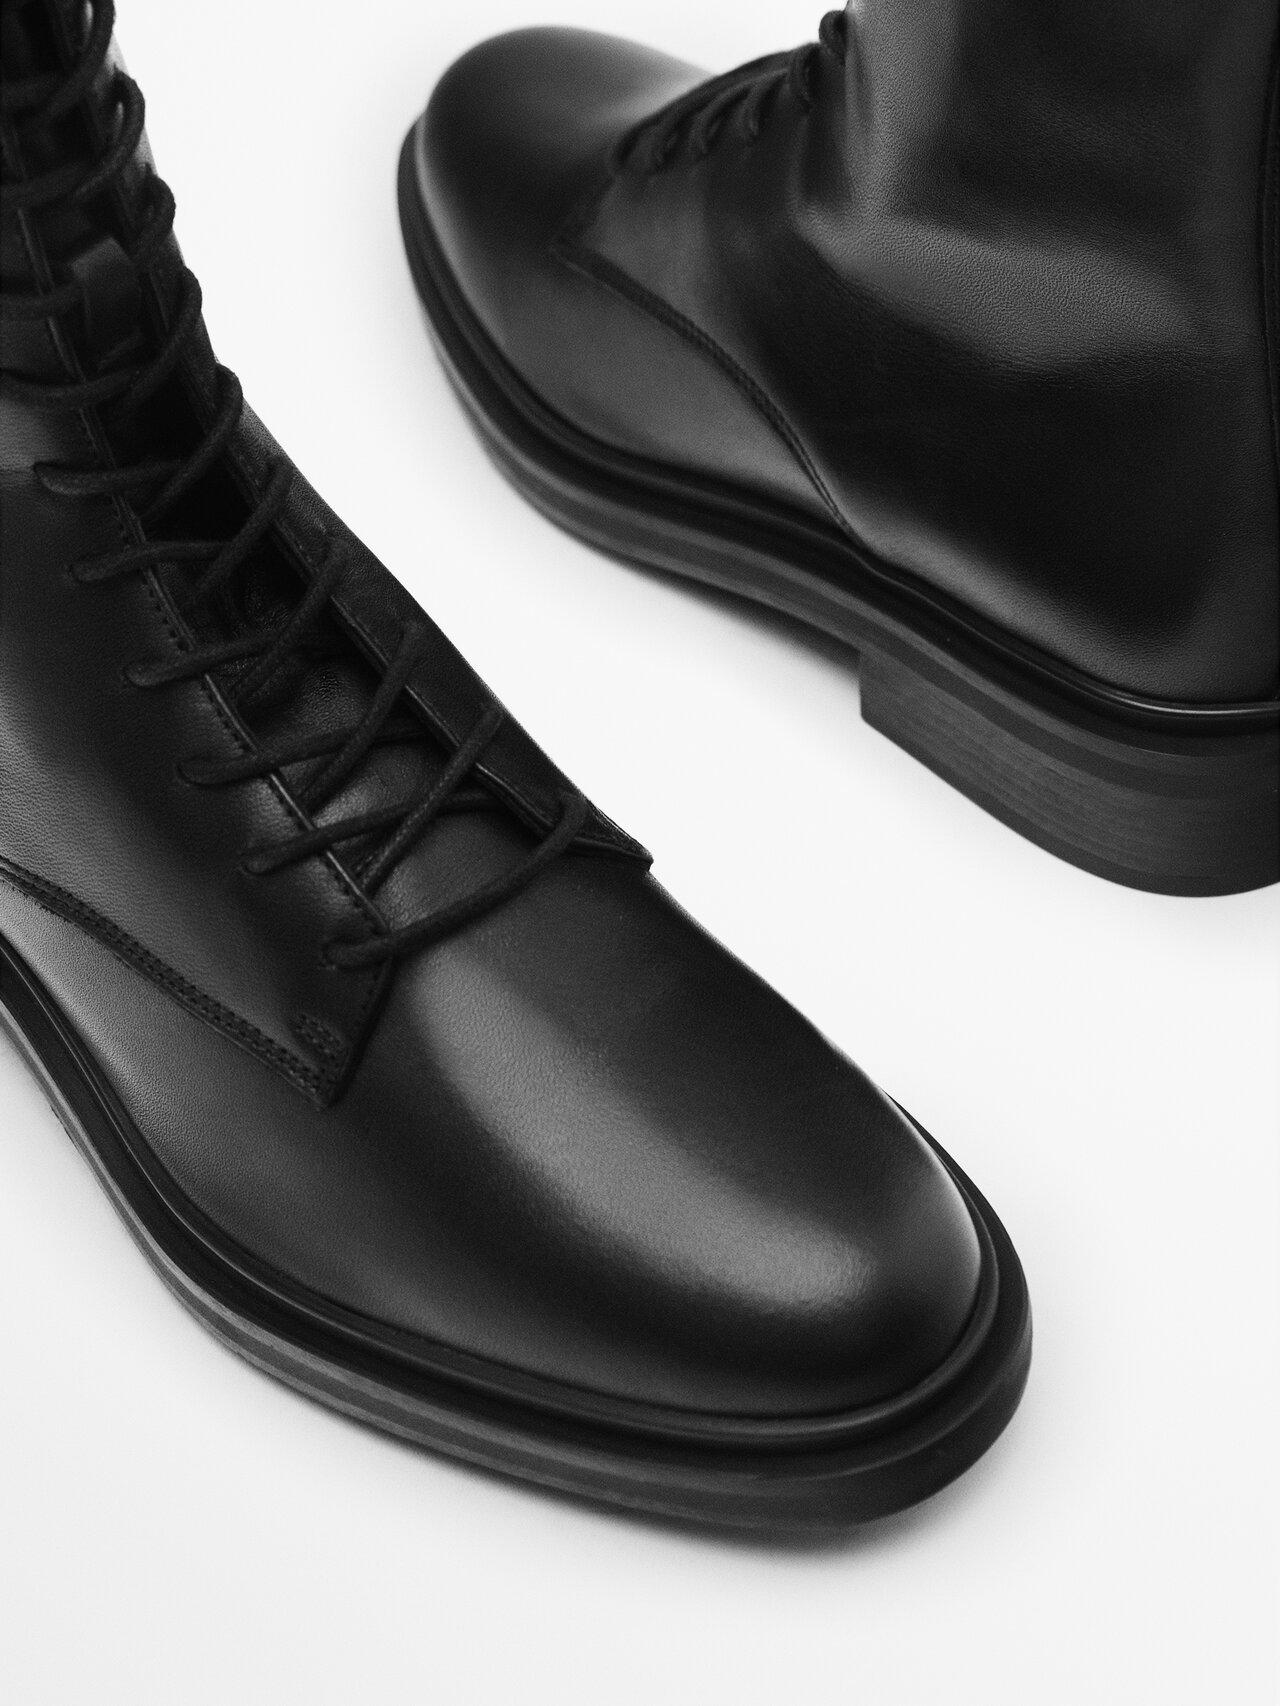 MASSIMO DUTTI Lace-up Leather Ankle Boots in Black | Lyst